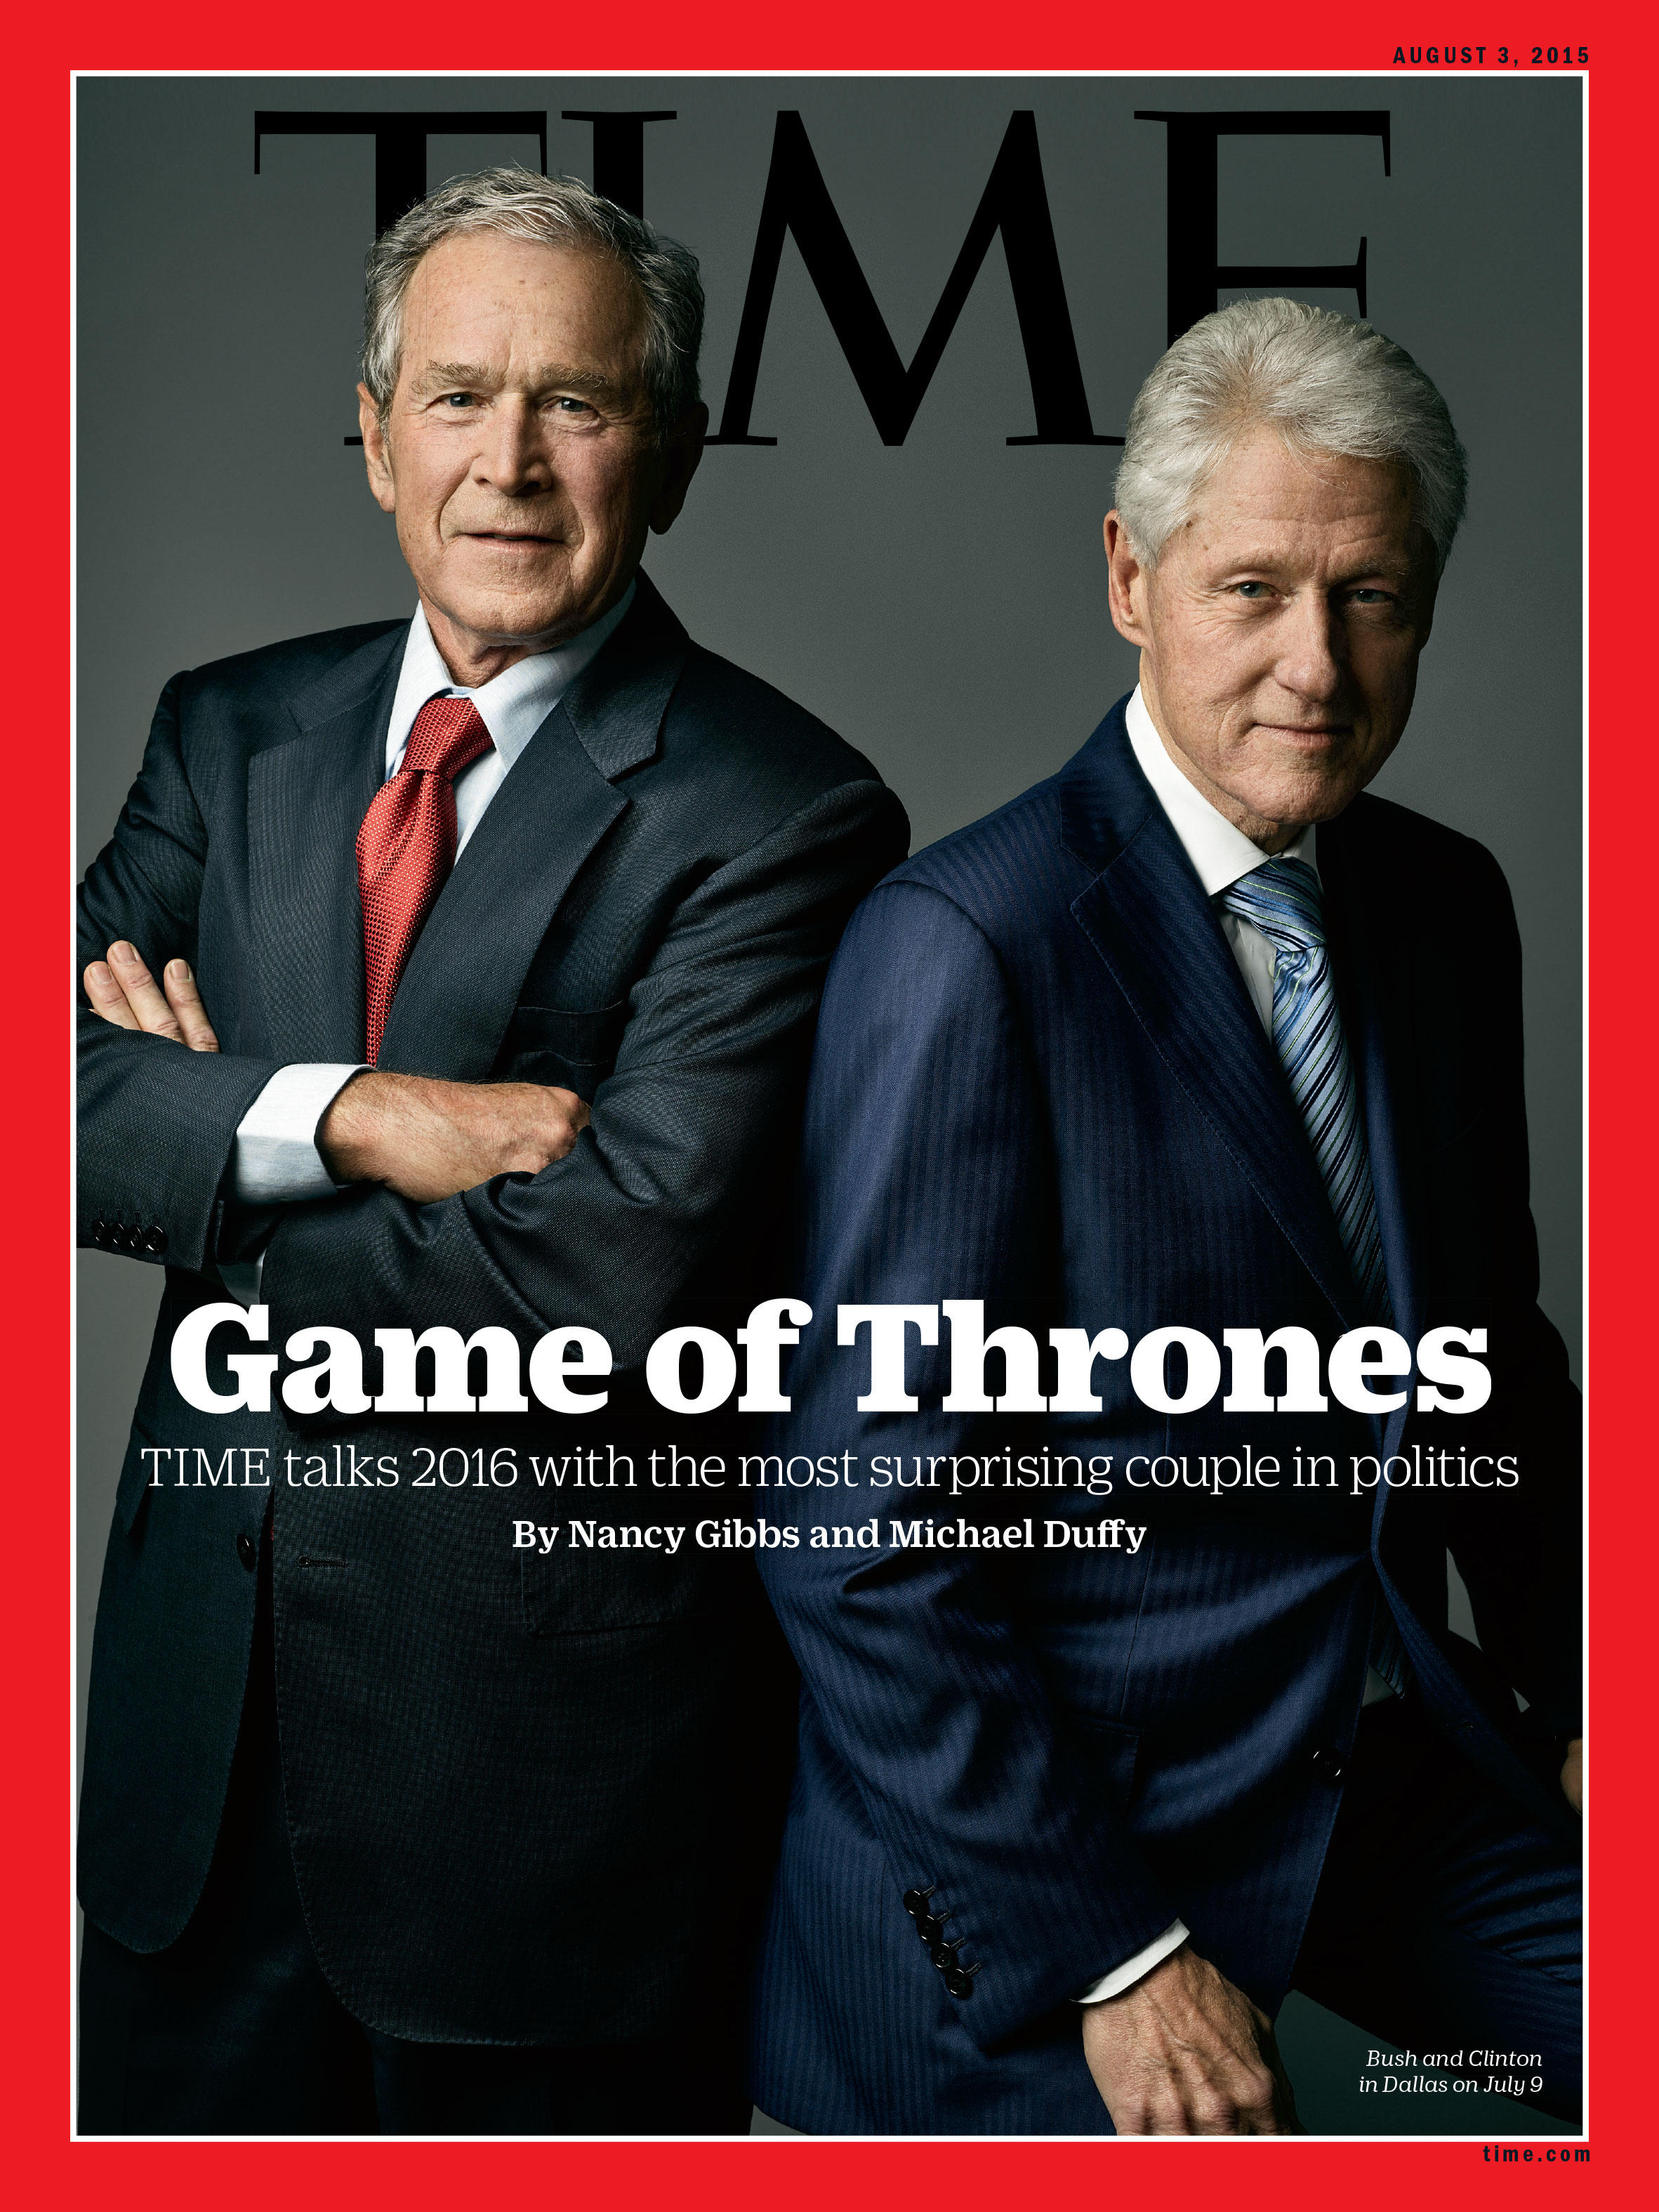 W. Bush And Bill Clinton Share The Cover of TIME Magazine KERA